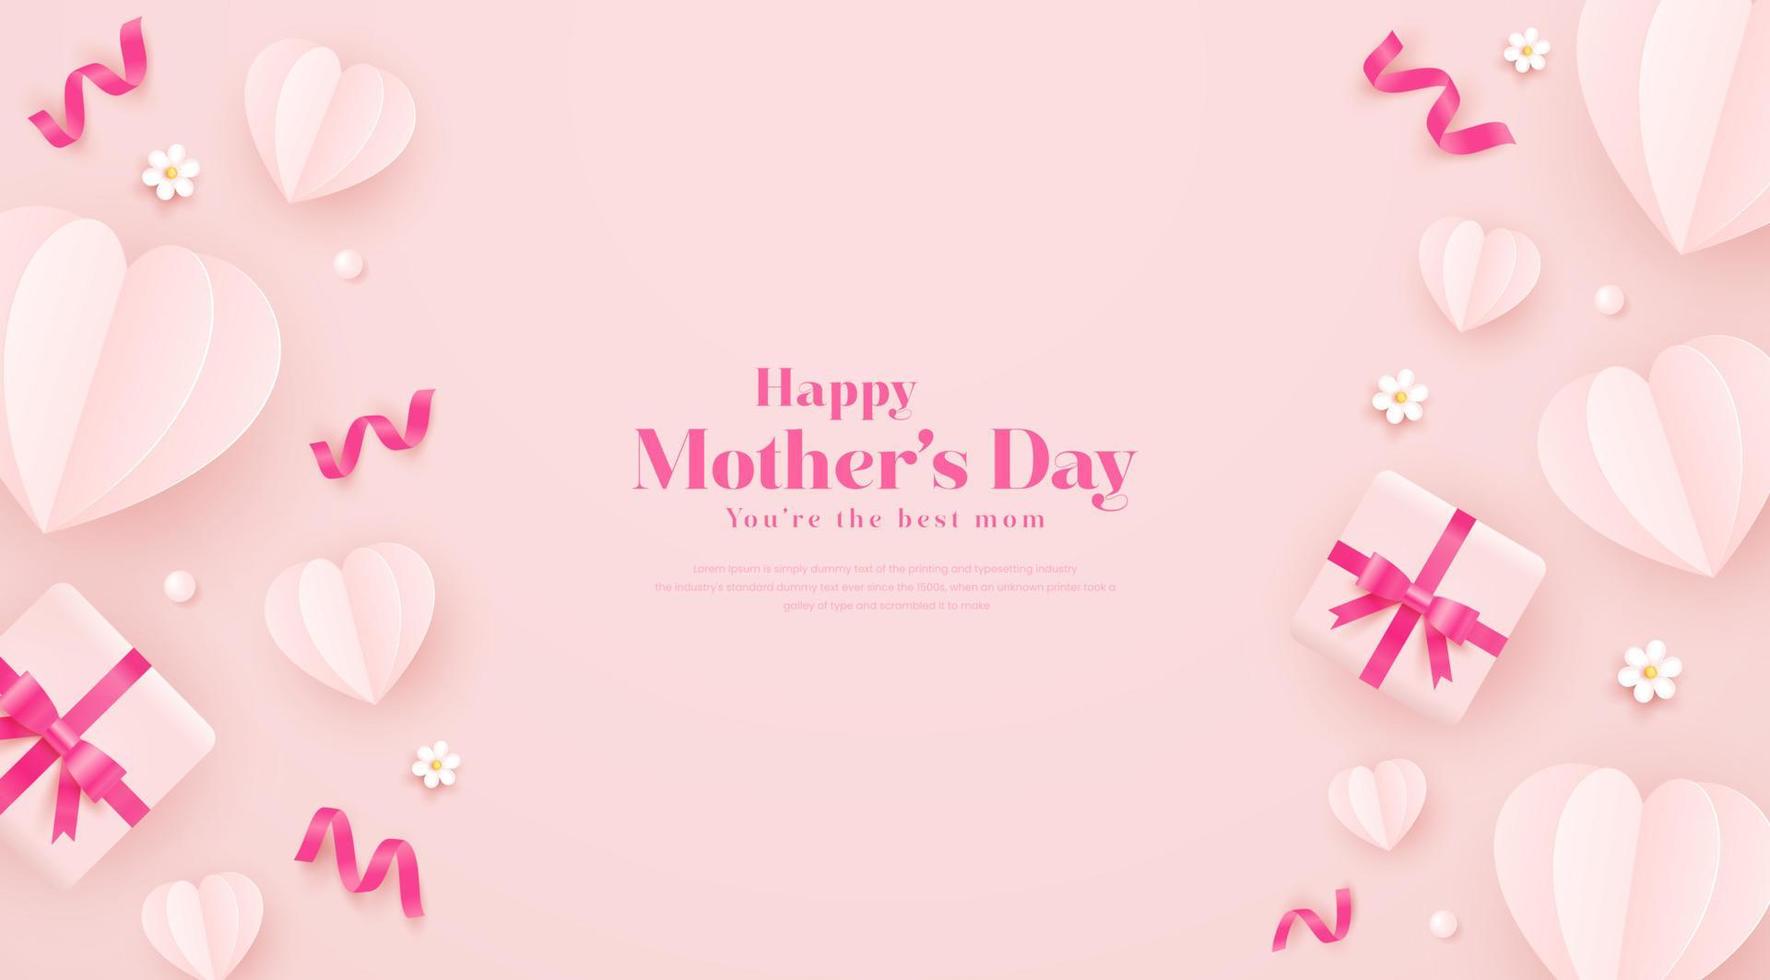 mother's day illustration in paper style with confetti, gift box, and flower vector